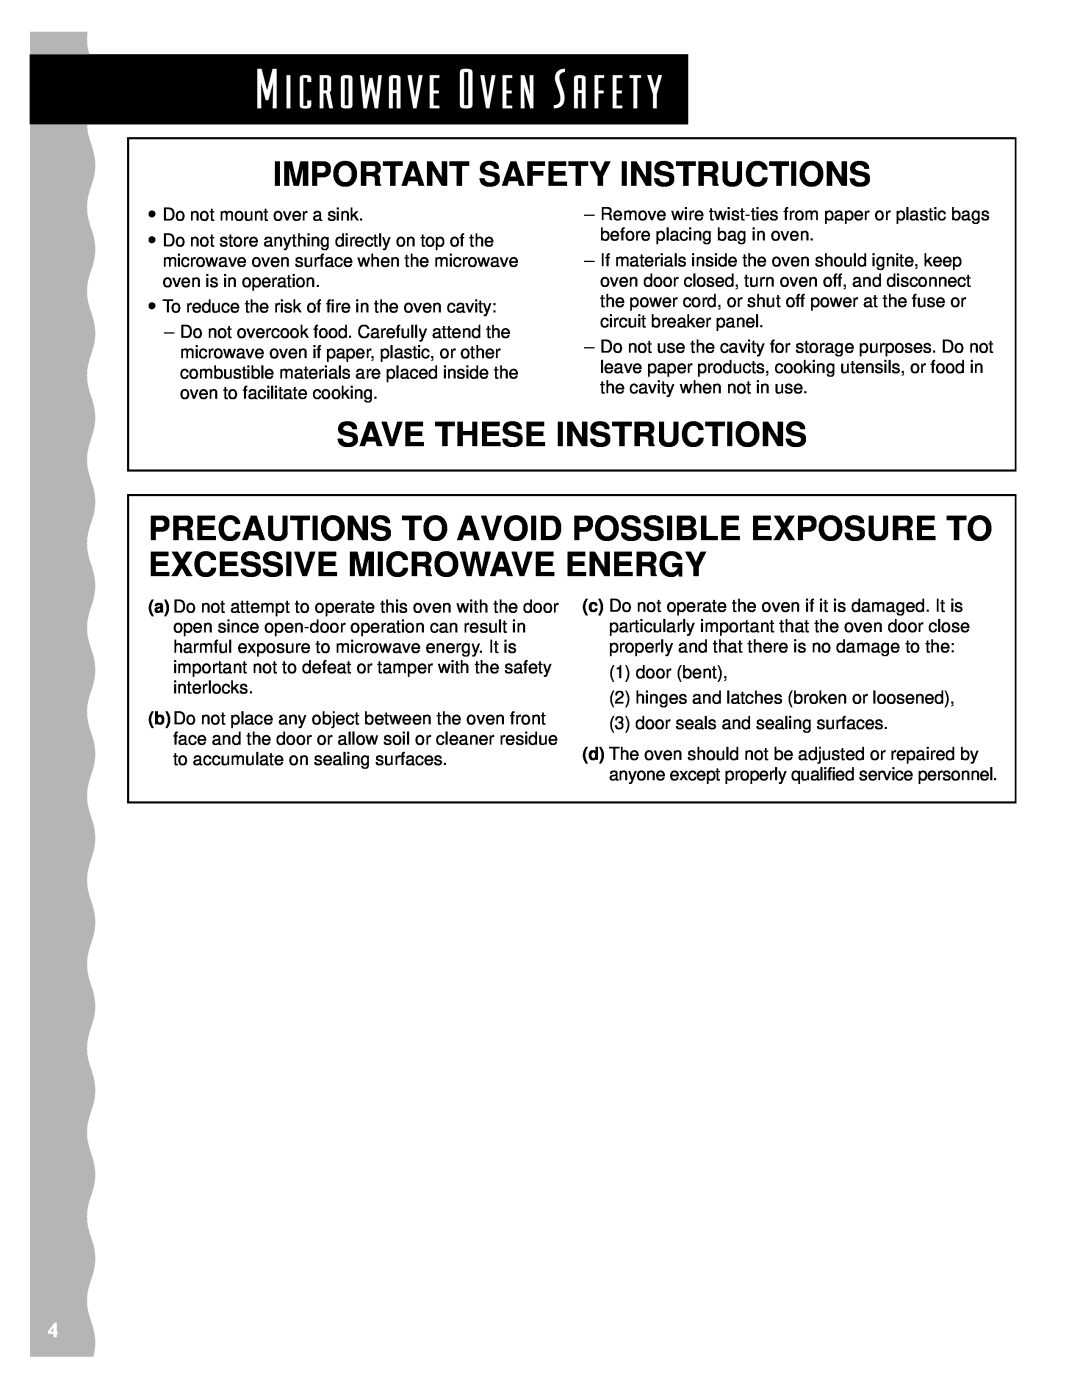 KitchenAid KCMS135H M i c r o w a v e O v e n S a f e t y, Important Safety Instructions, Save These Instructions 